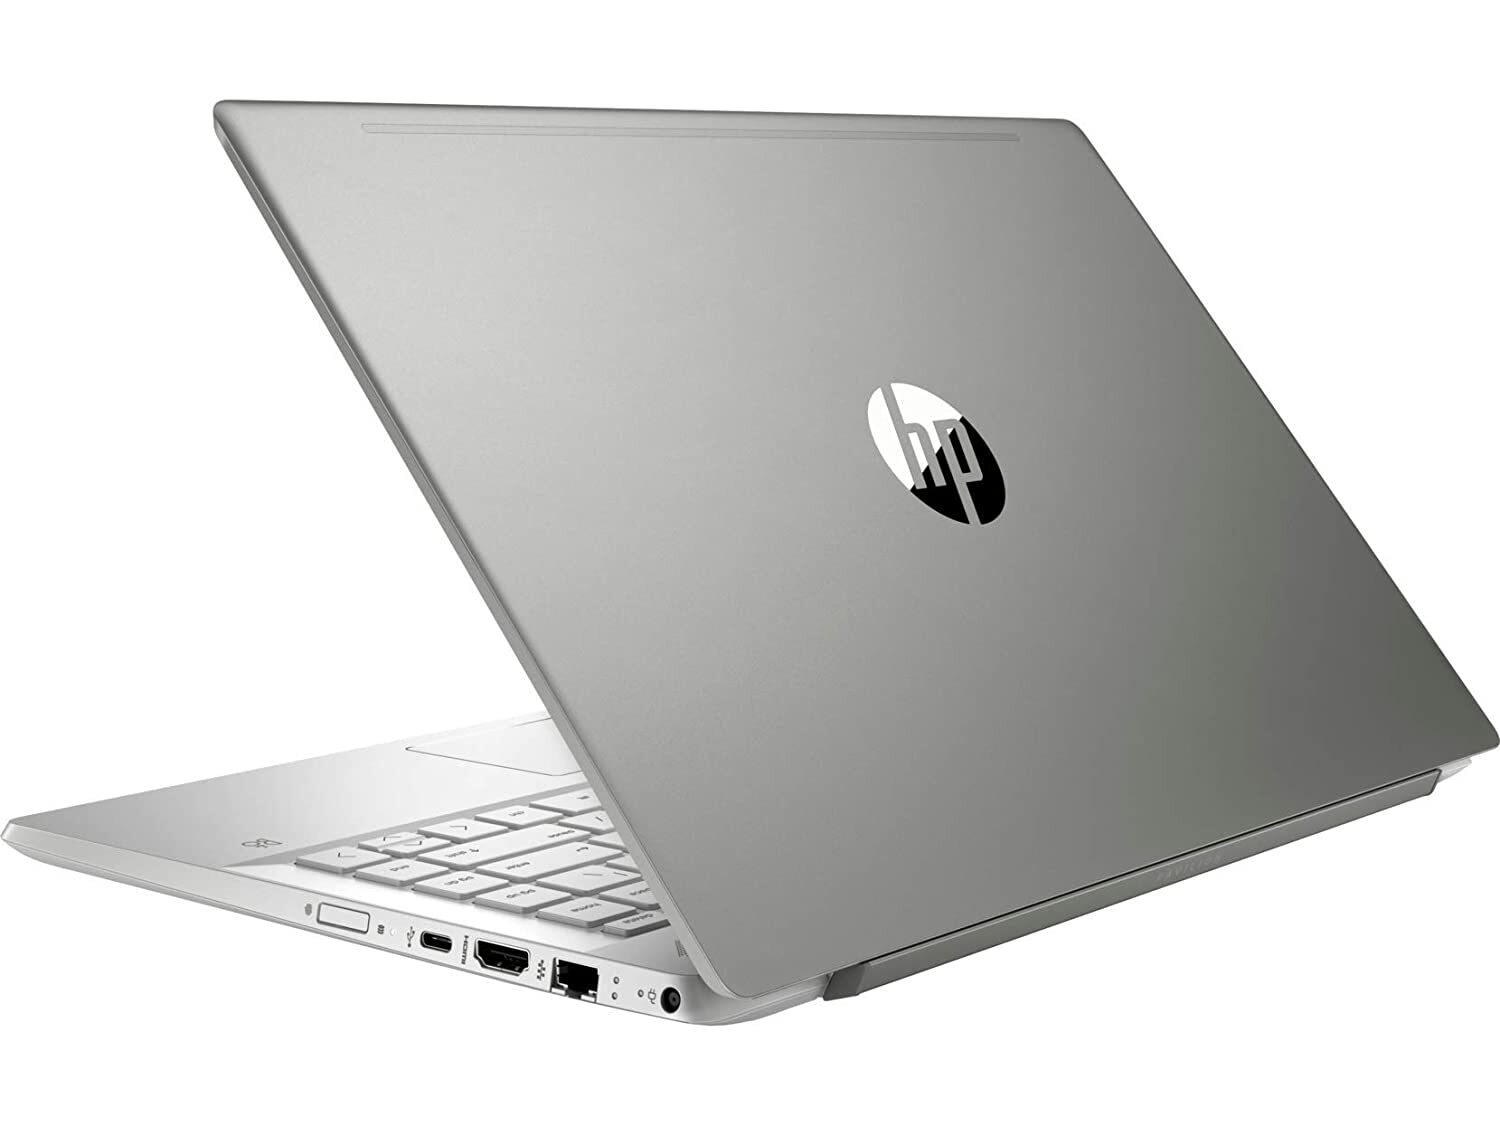 HP Pavilion 14 14-ce3022TX 2019 14-inch Laptop (10th Gen Core i5-1035G1/8GB/1TB HDD + 256GB SSD/Windows 10, Home/2GB Graphics), Mineral Silver